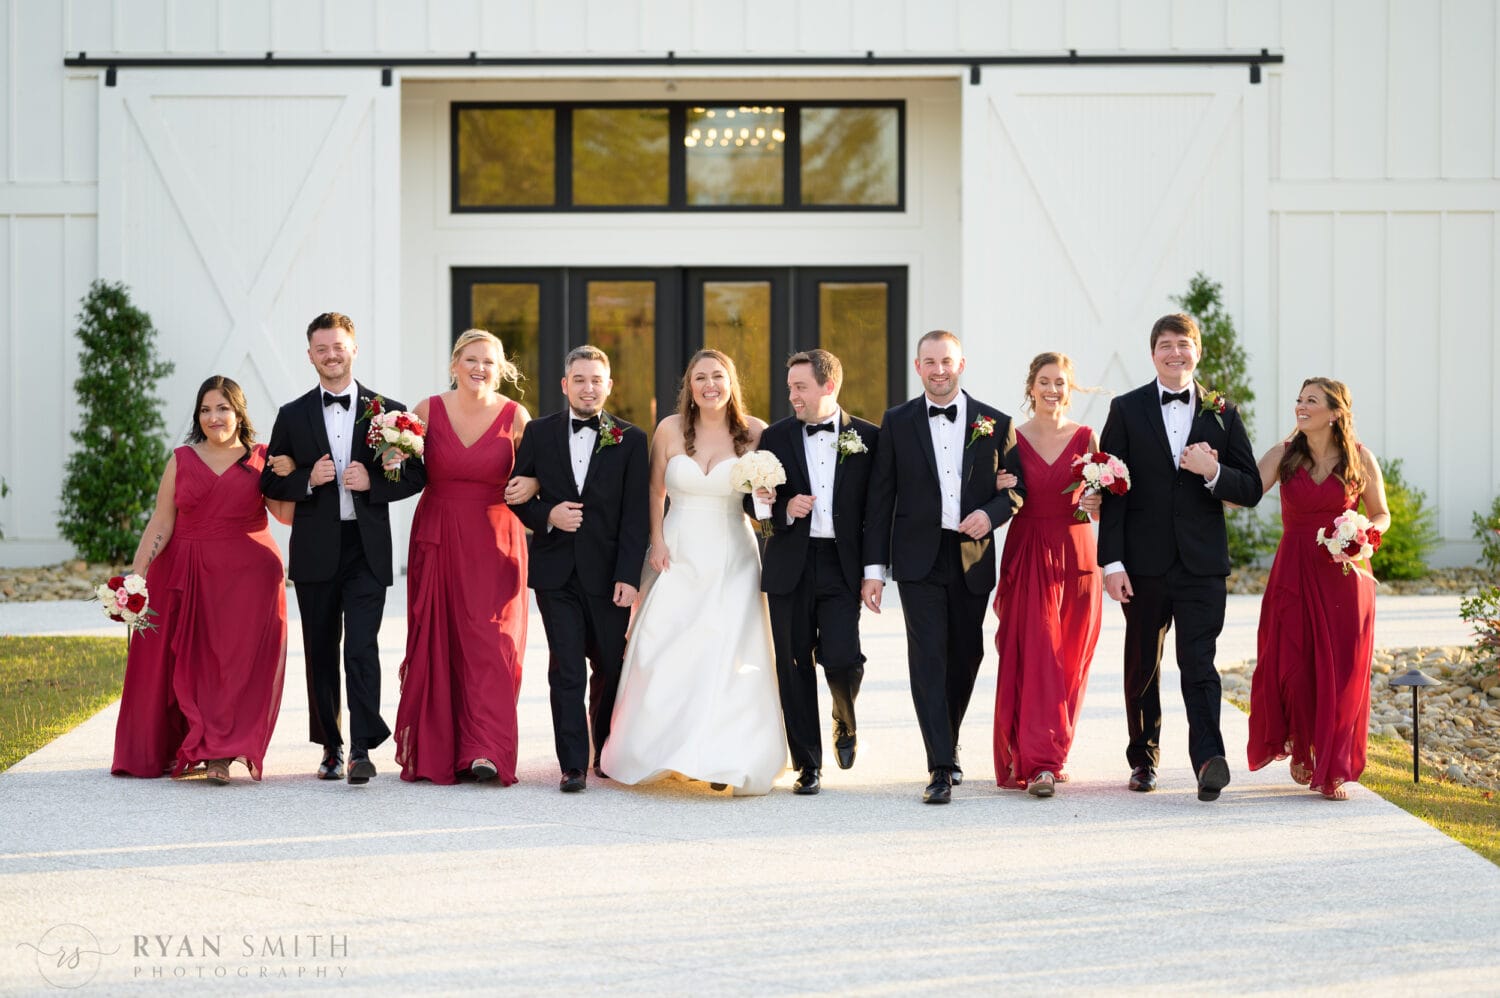 Bride and groom walking with the bridesmaids and groomsmen - The Venue at White Oaks Farm